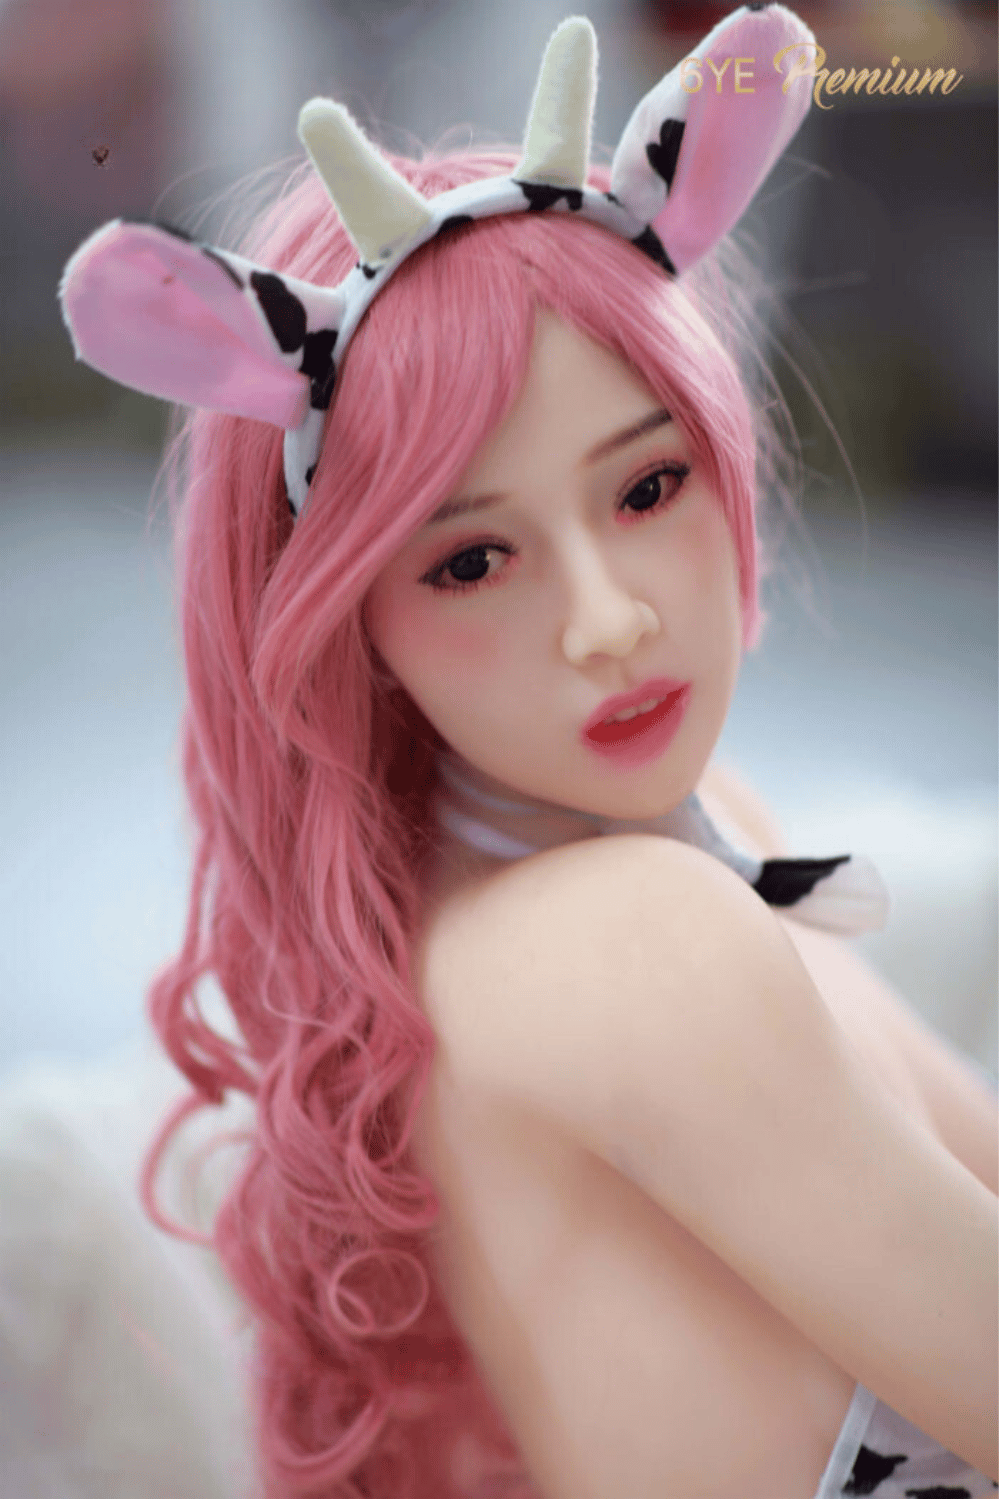 Lily - B-cup Realistic Sex Doll by 6YE - 5ft 5in (165cm) - Love Dolls 4U